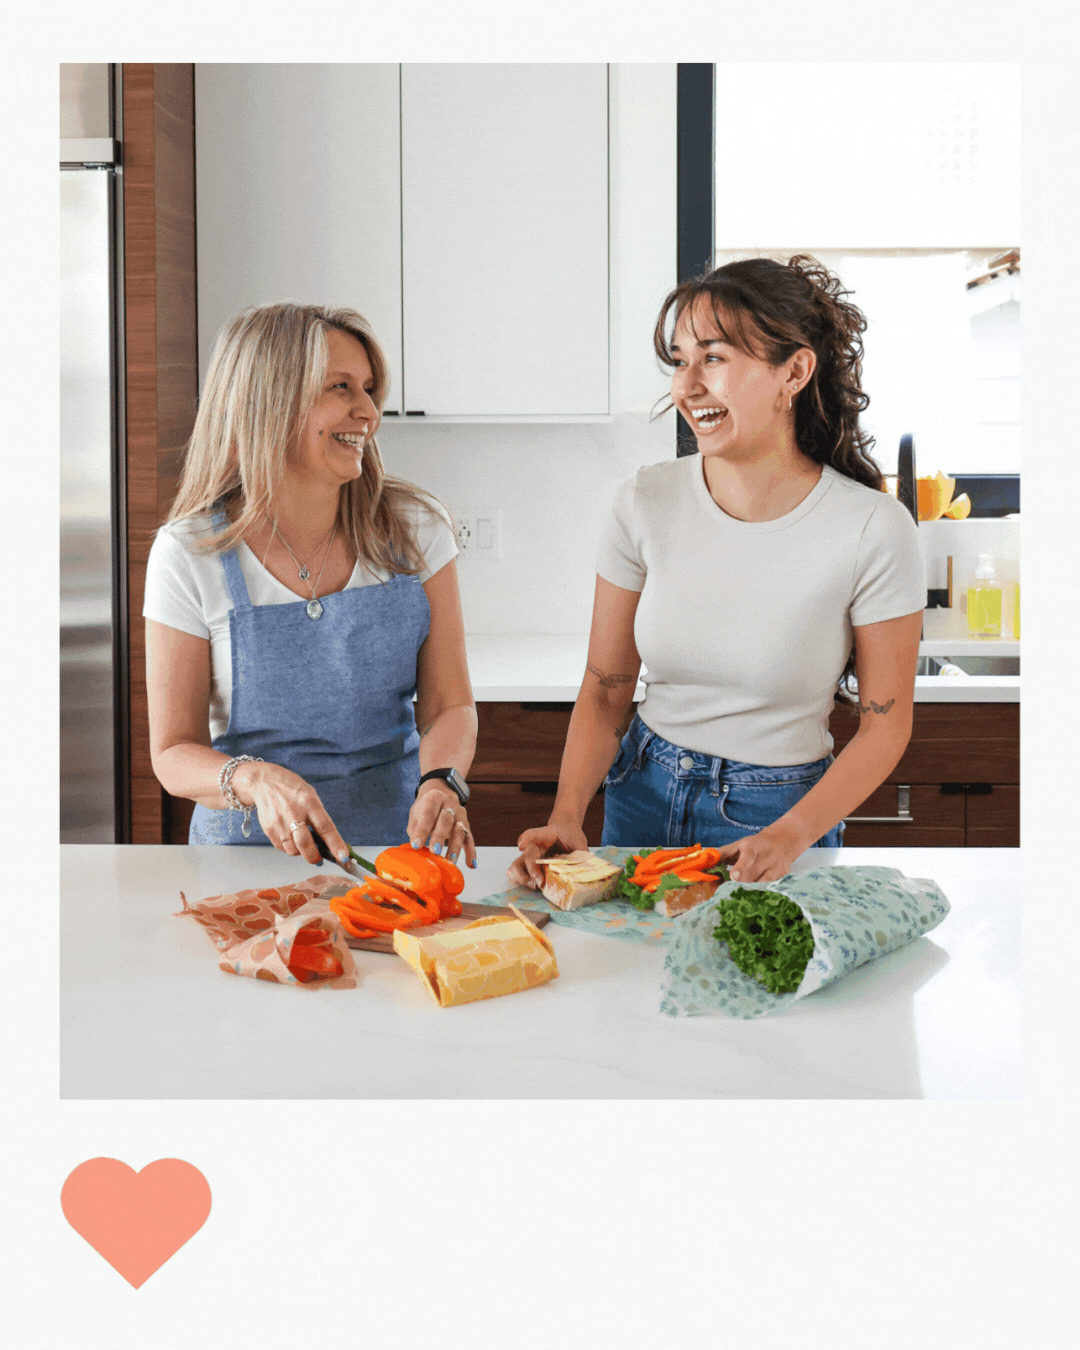 Polaroid instagram image with mom and daughter in the kitchen laughing together while making lunch. they are using beeswax food wraps from Nature Bee to keep their food fresh